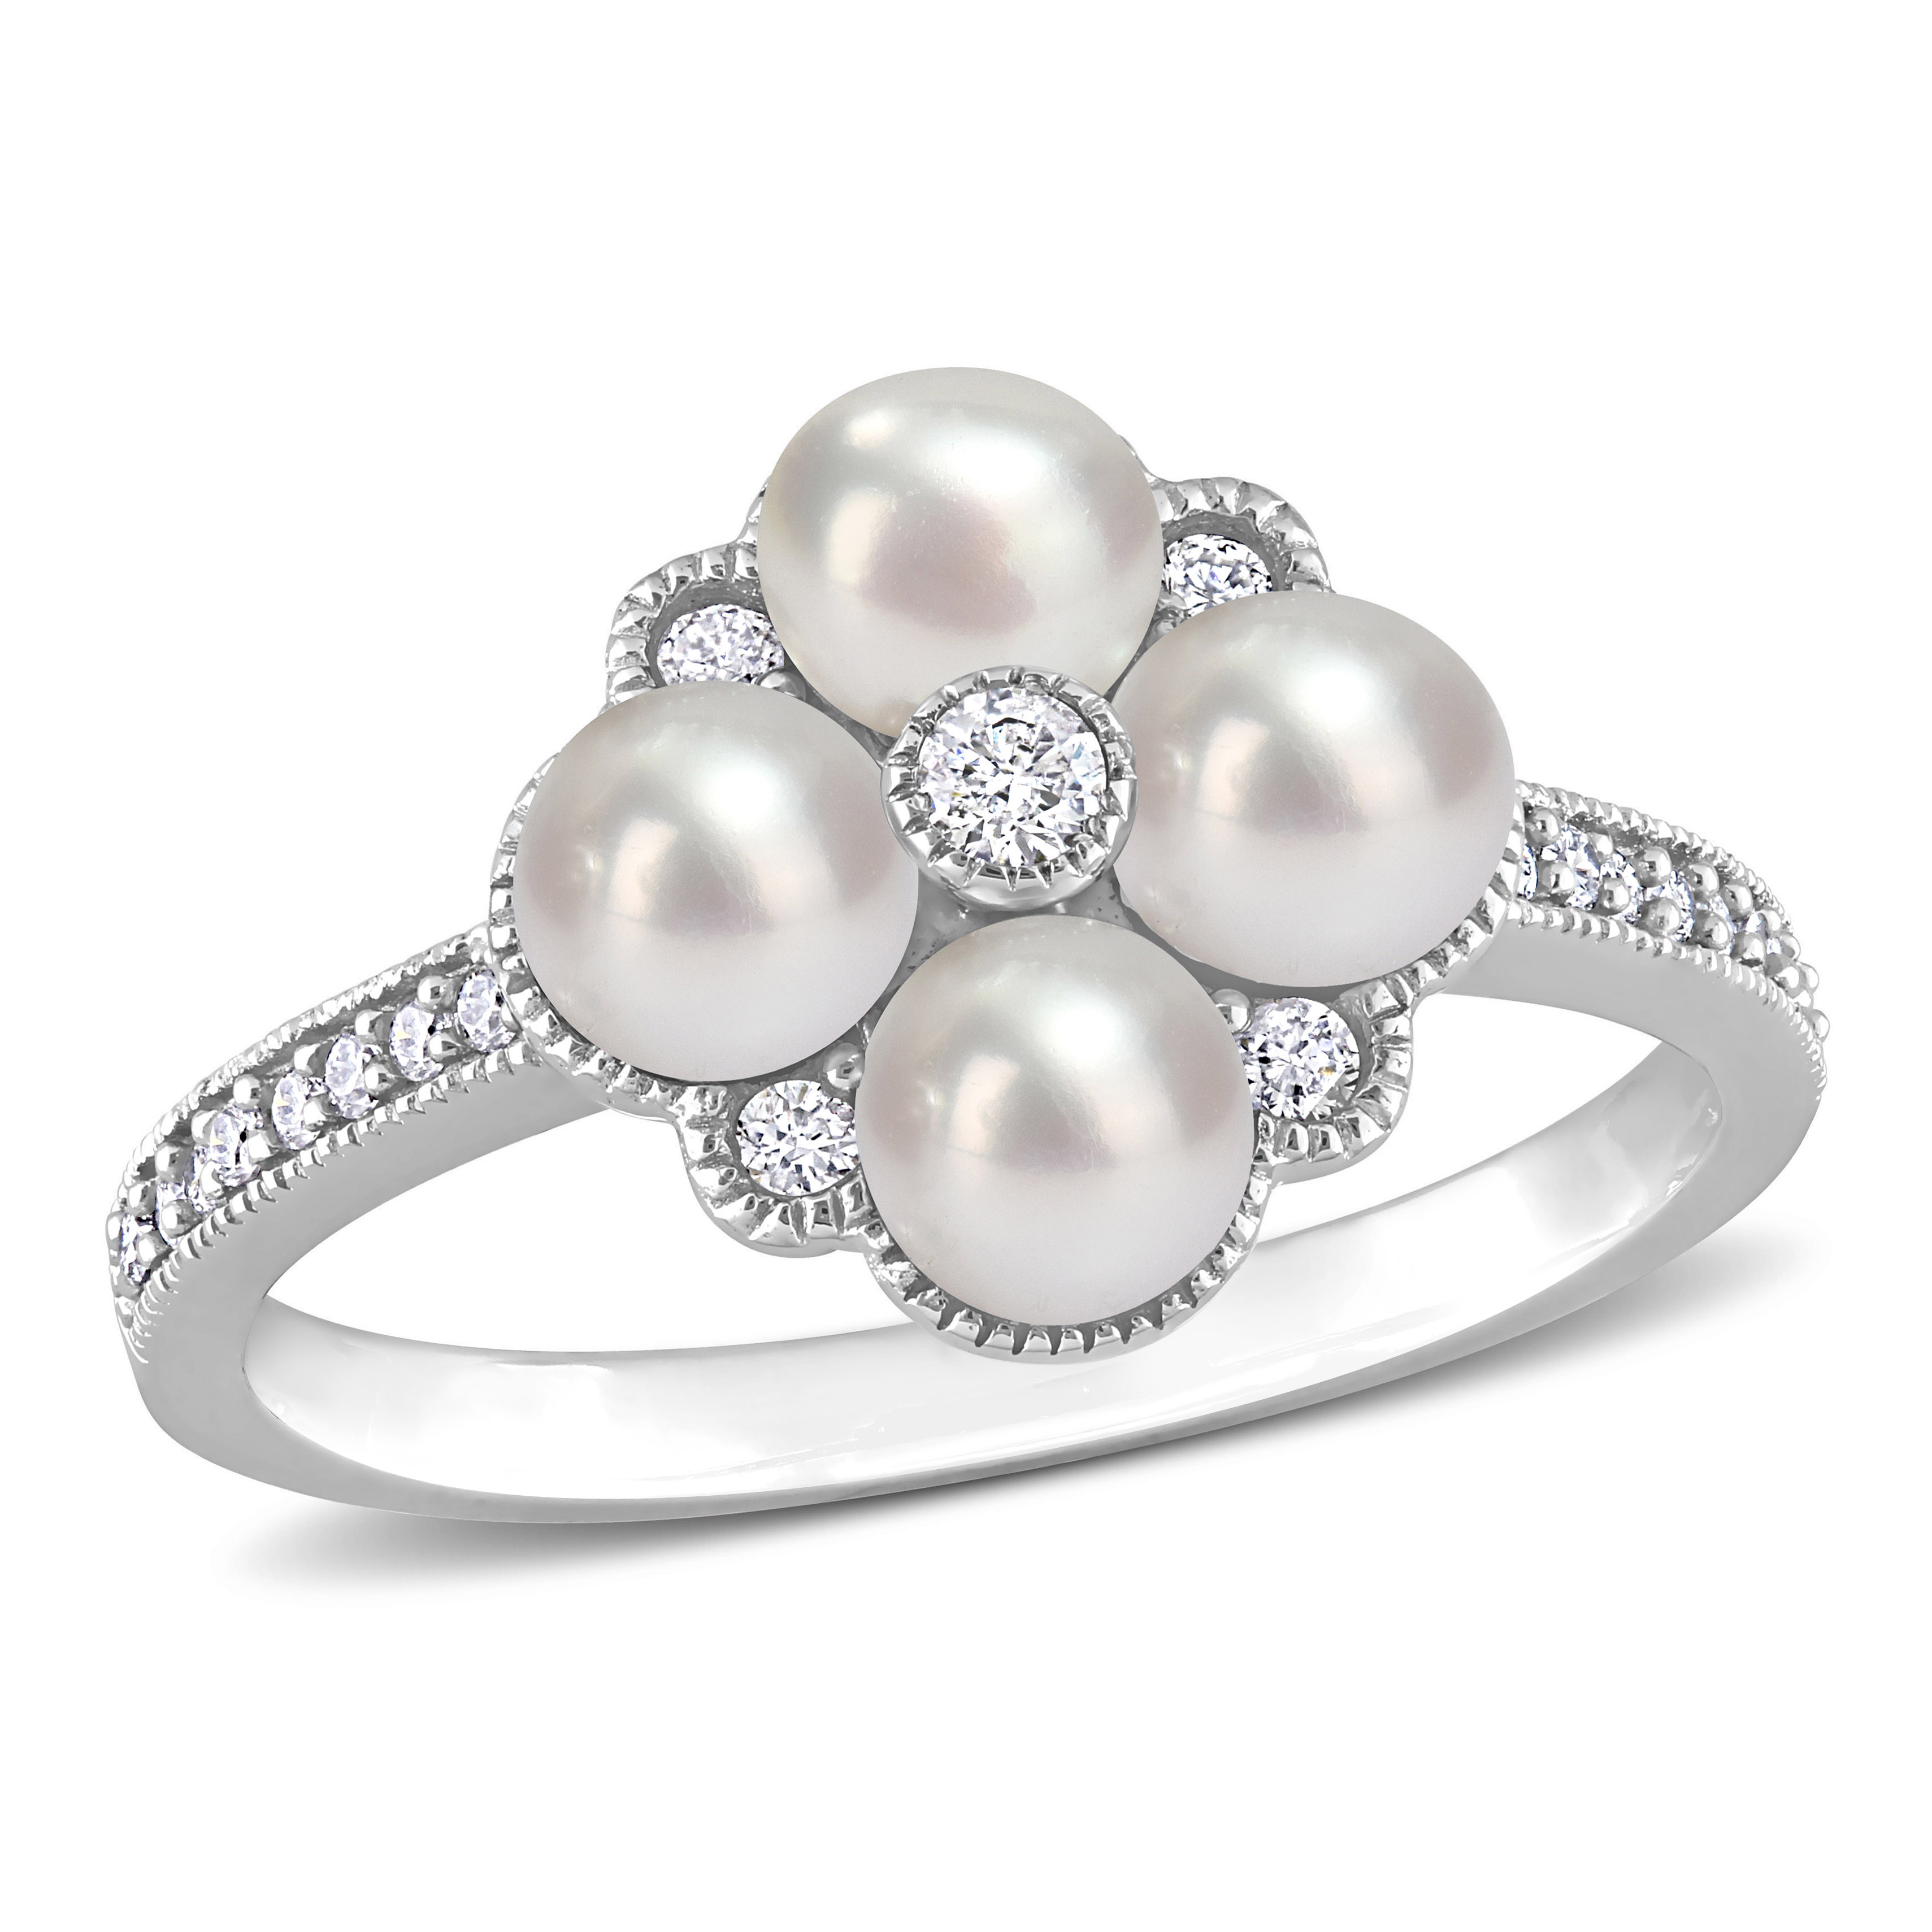 Cultured Freshwater Pearl and 1/6 CT TDW Diamond Cluster Ring in 14k White Gold